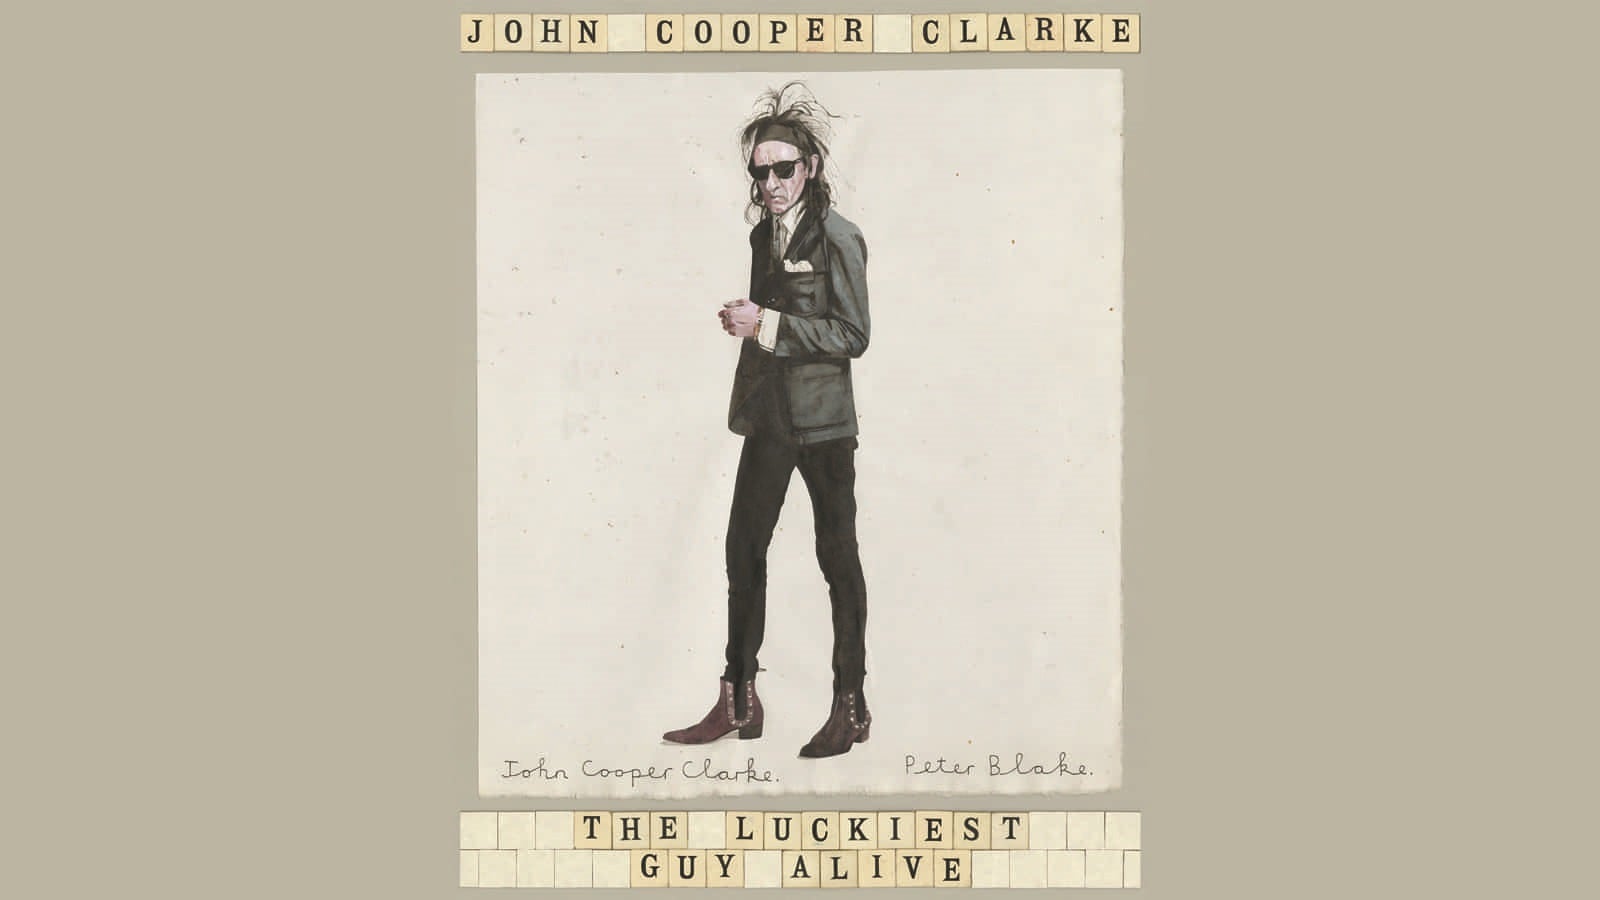 Section of the The Luckiest Guy Alive book cover showing an illustration of John Cooper Clarke